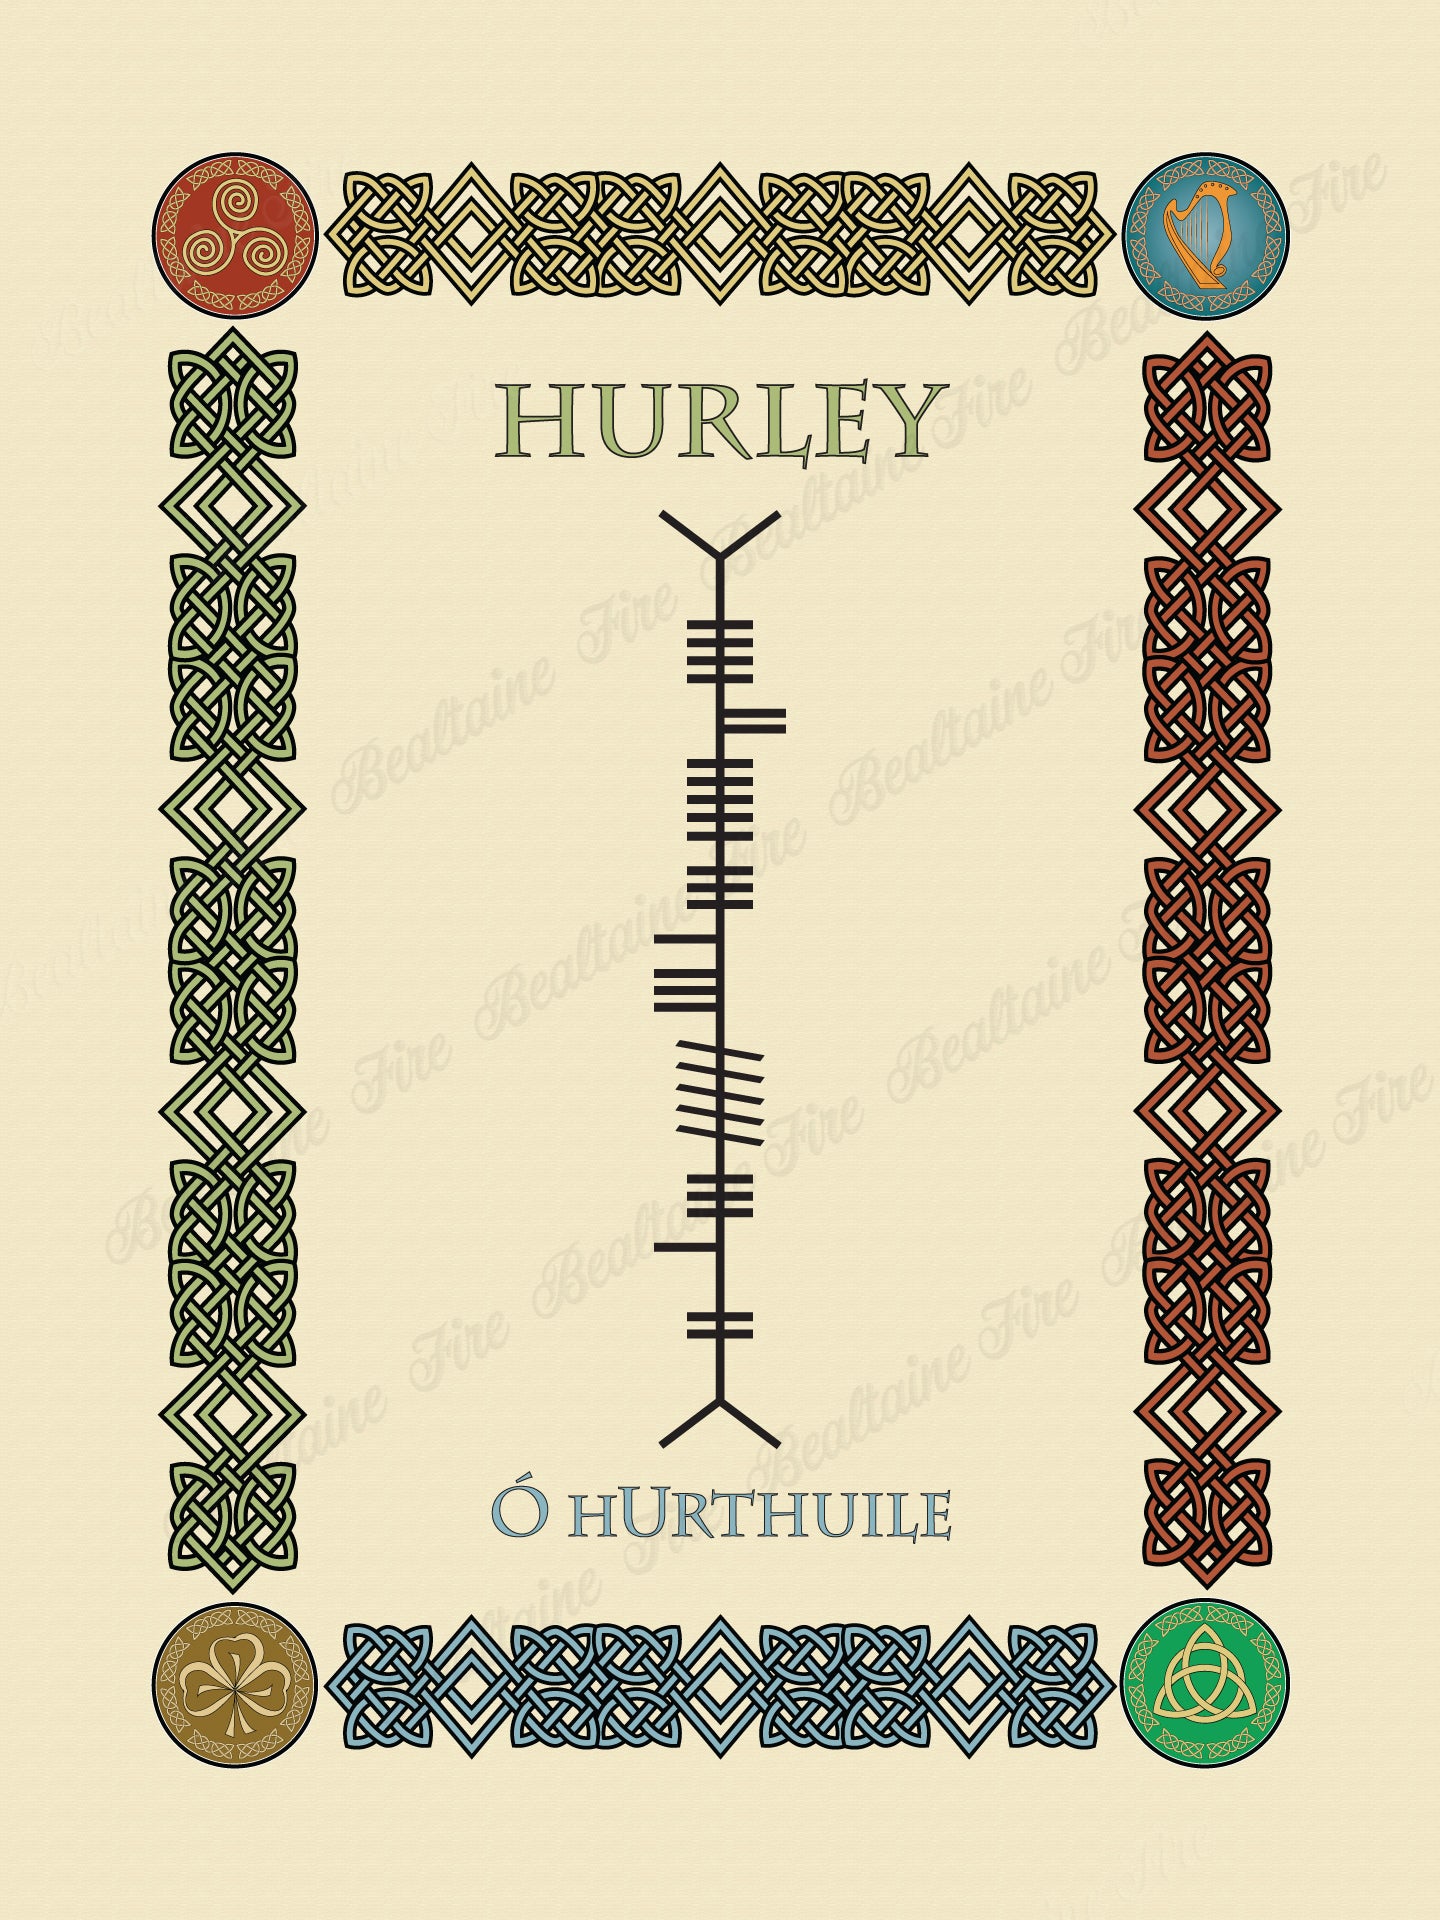 Hurley in Old Irish and Ogham - PDF Download